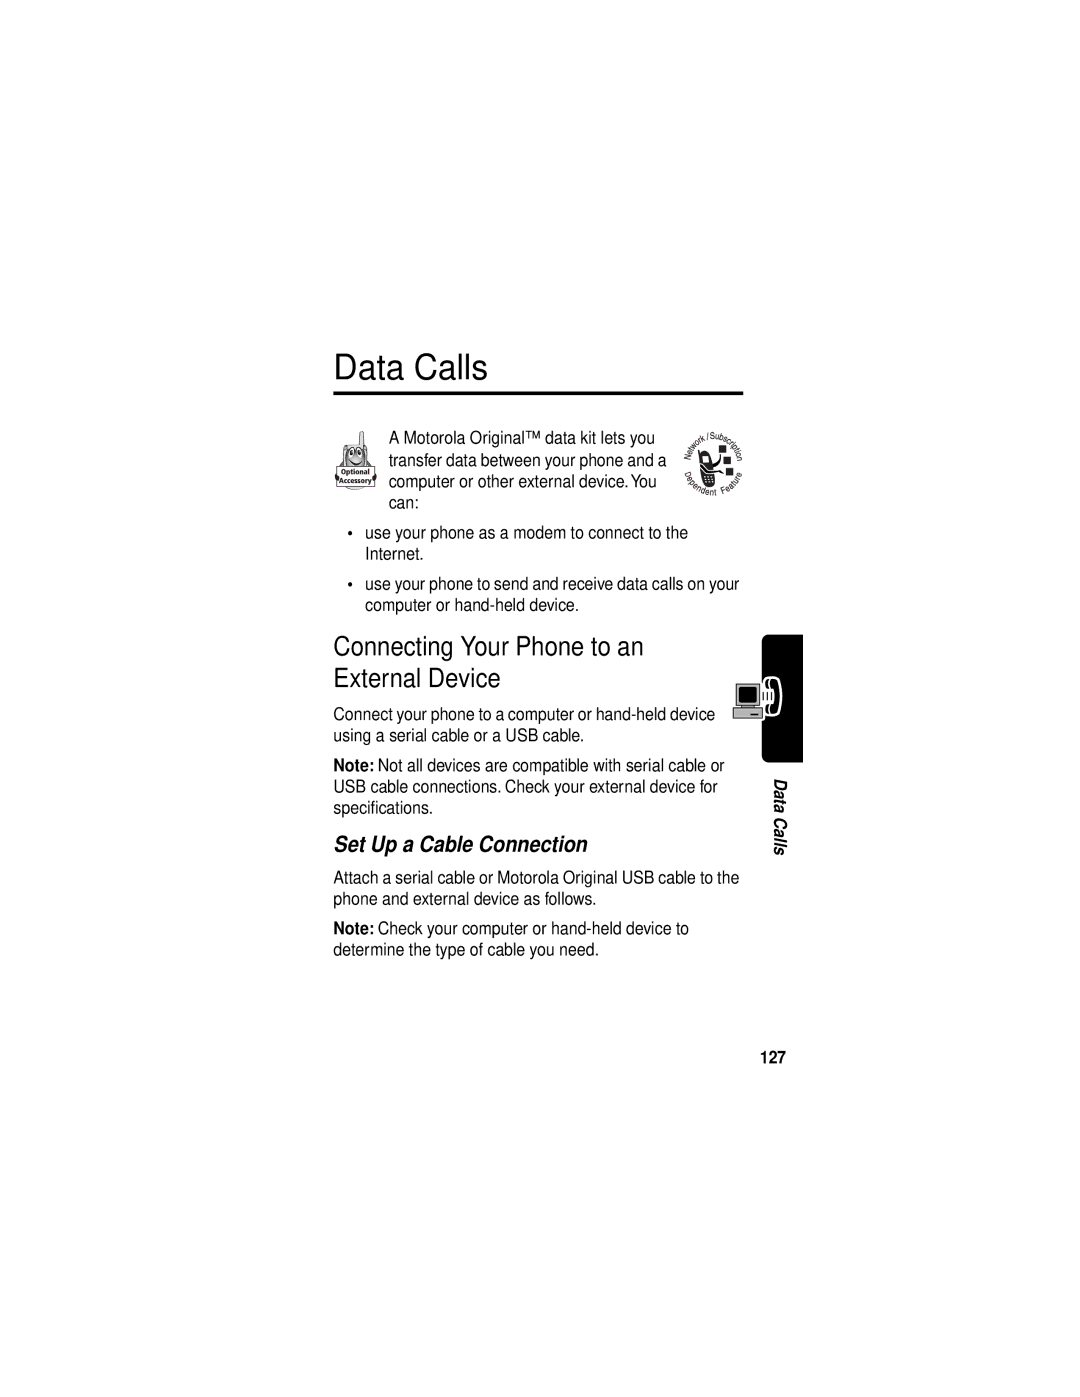 Motorola C331 manual Data Calls, Connecting Your Phone to an External Device, Set Up a Cable Connection, 127 